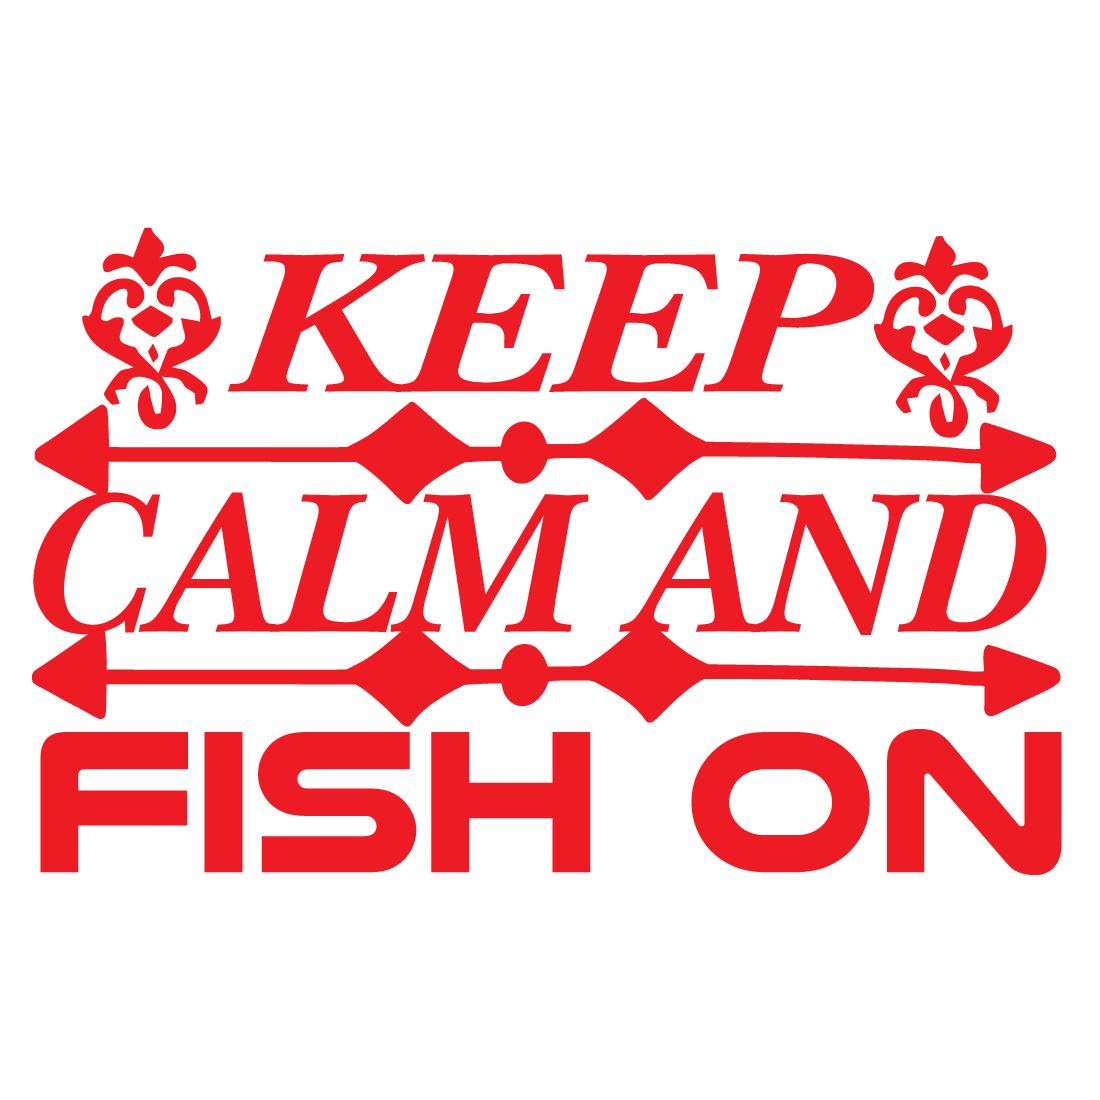 Keep-calm-and-fish-on preview image.